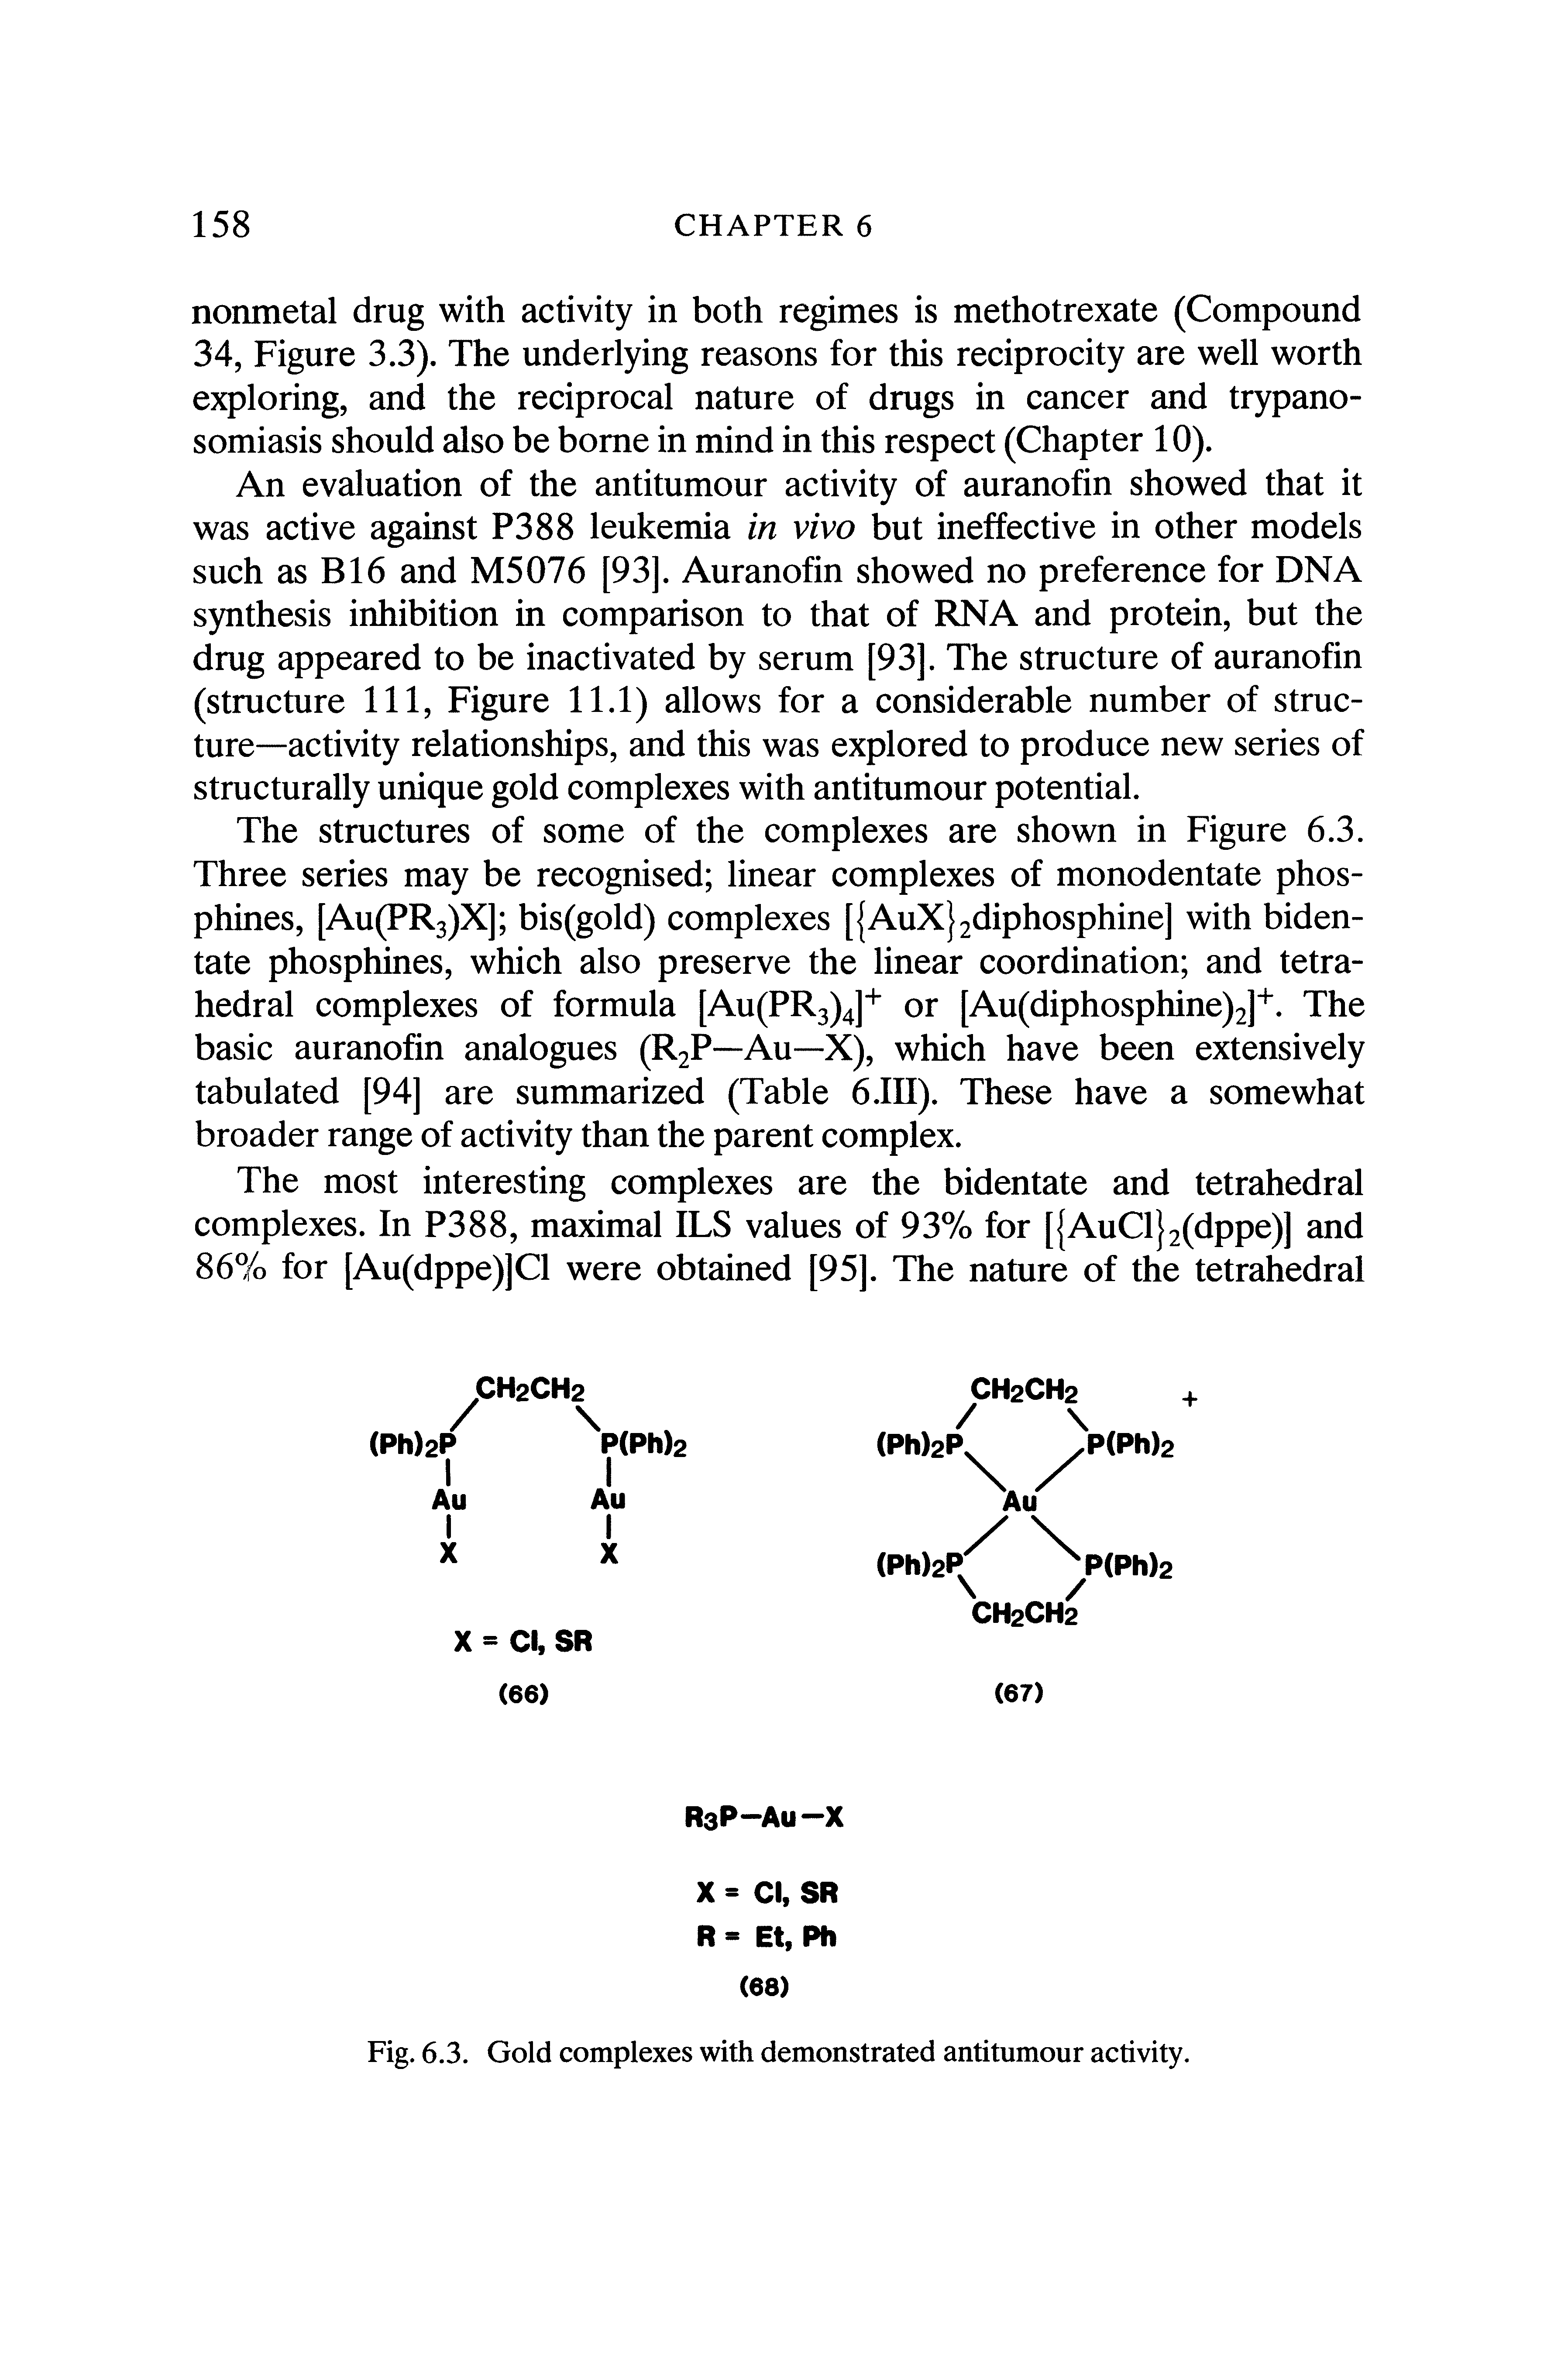 Fig. 6.3. Gold complexes with demonstrated antitumour activity.